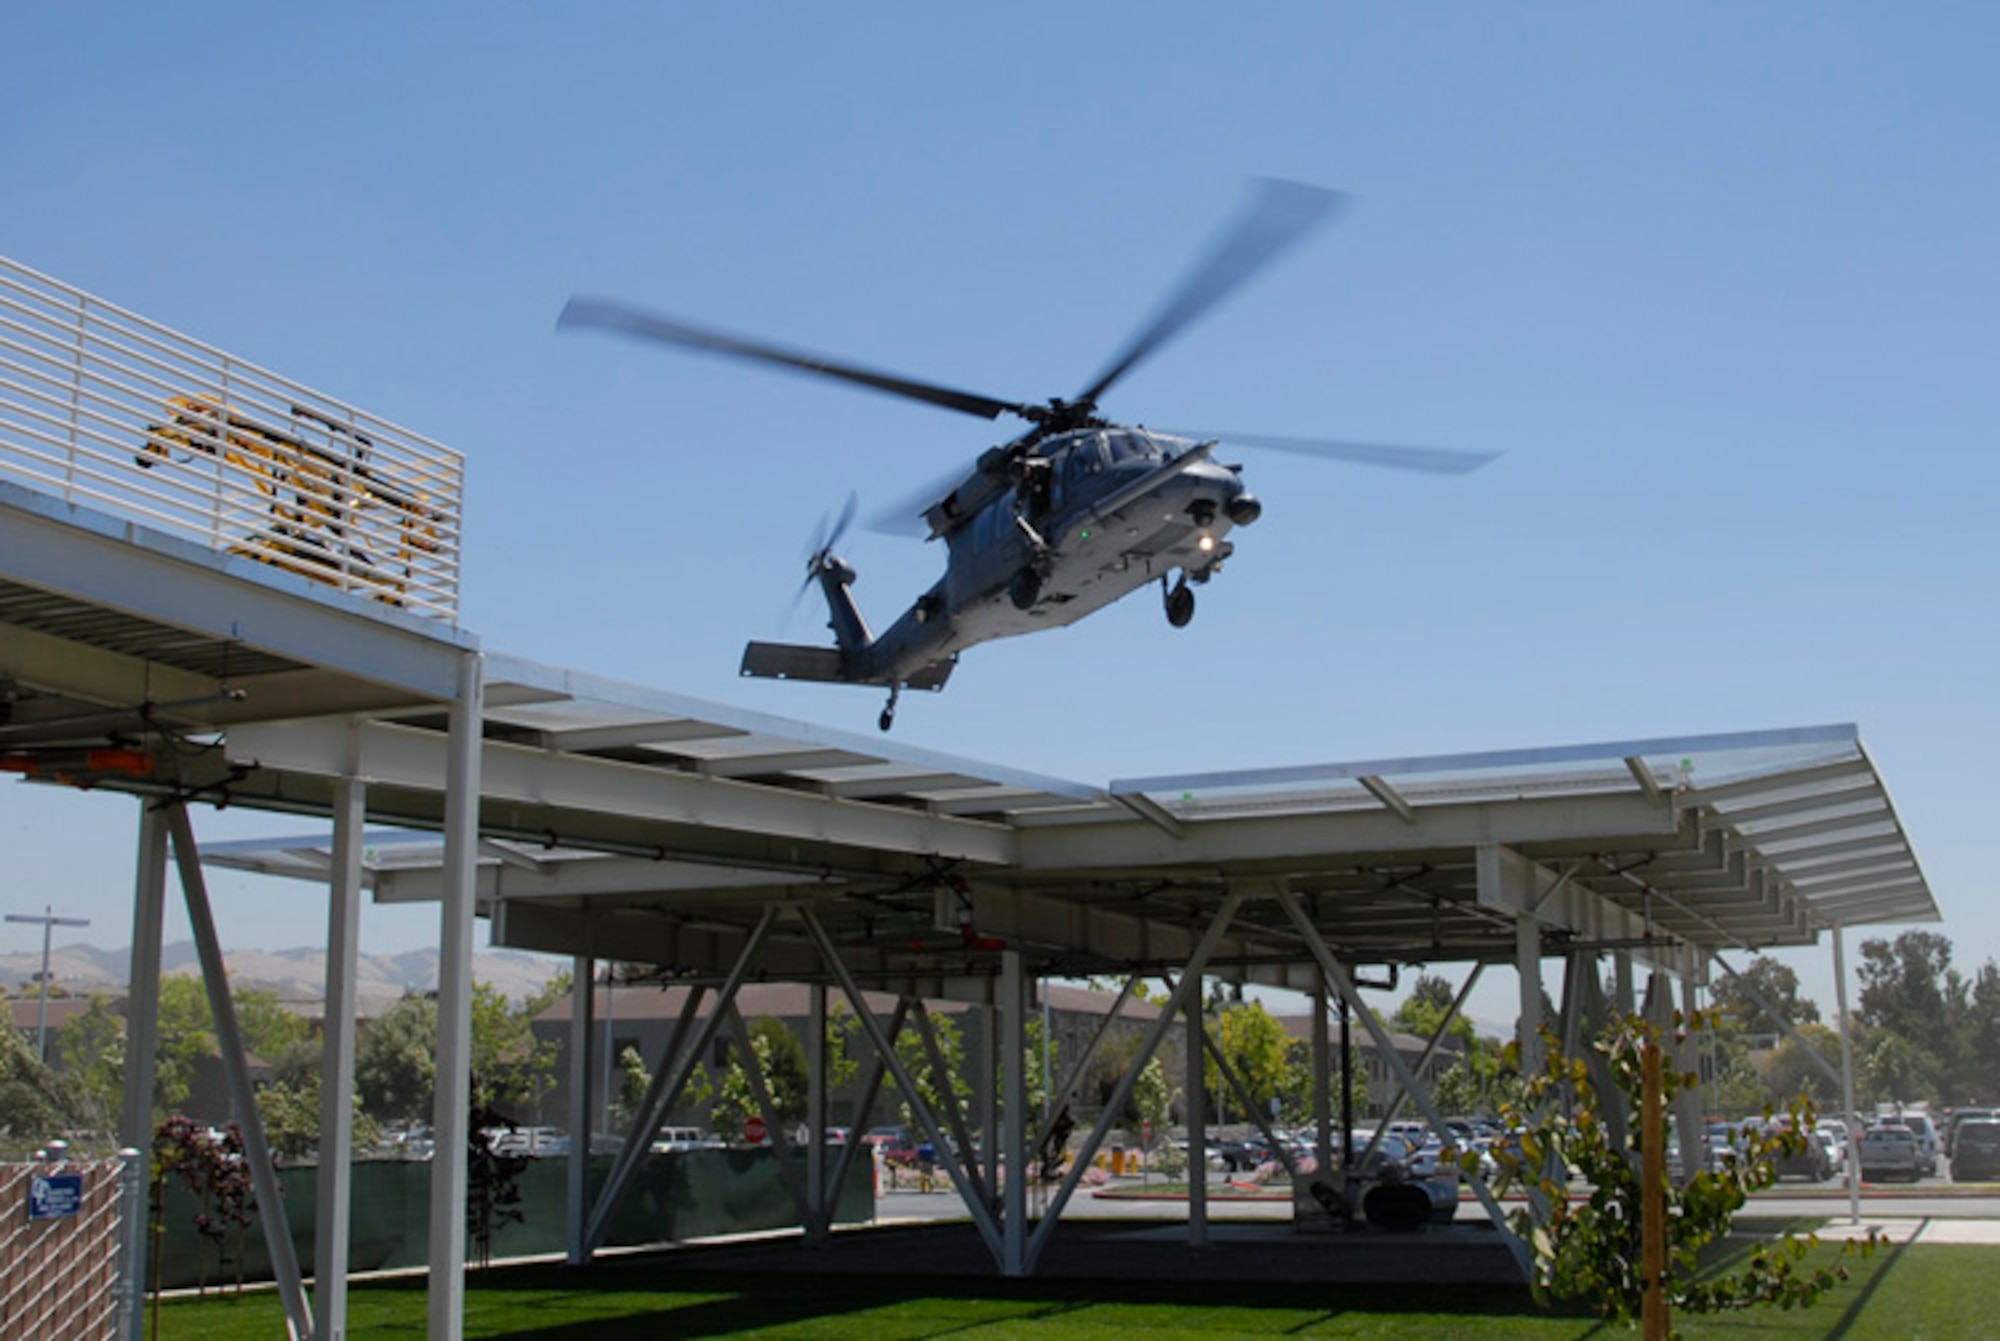 An HH-60G Pave Hawk from the 129th Rescue Wing, Moffett Federal Airfield, Calif. lands at the new helipad at the San Jose Regional Medical Center on June 9, 2008.  The pad has been constructed to withstand the weight of the Pave Hawk. (U.S. Air Force photo by Staff Sgt. Andrew Hughan)